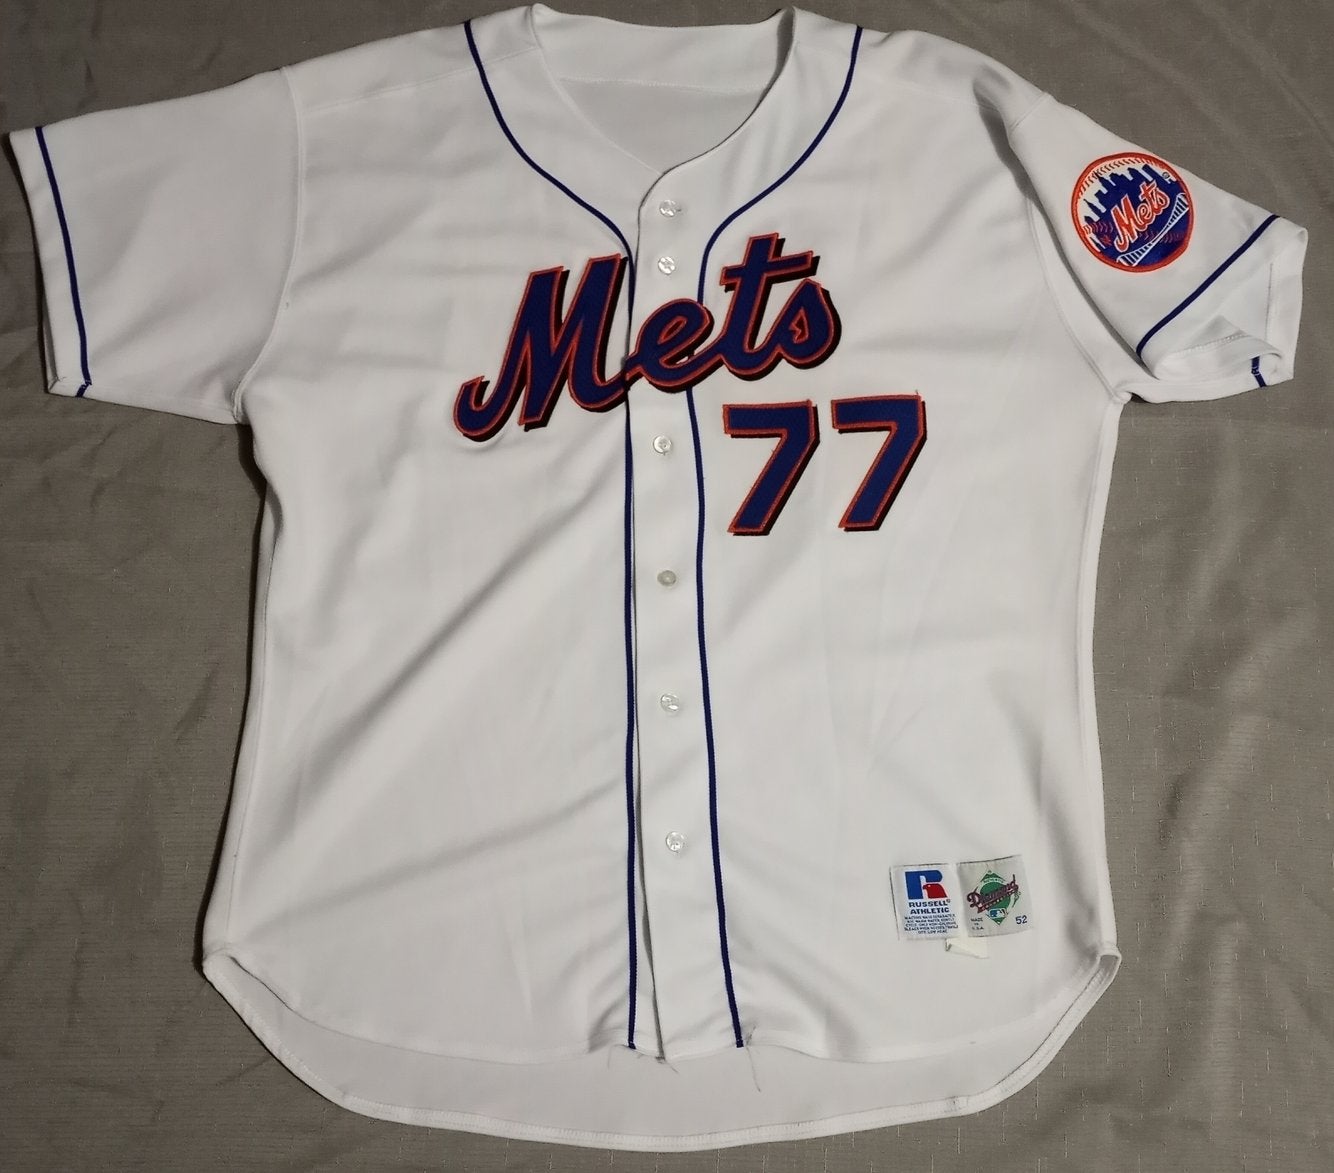 2XL/2TG New York Mets Russell Athletic Vintage Jersey 